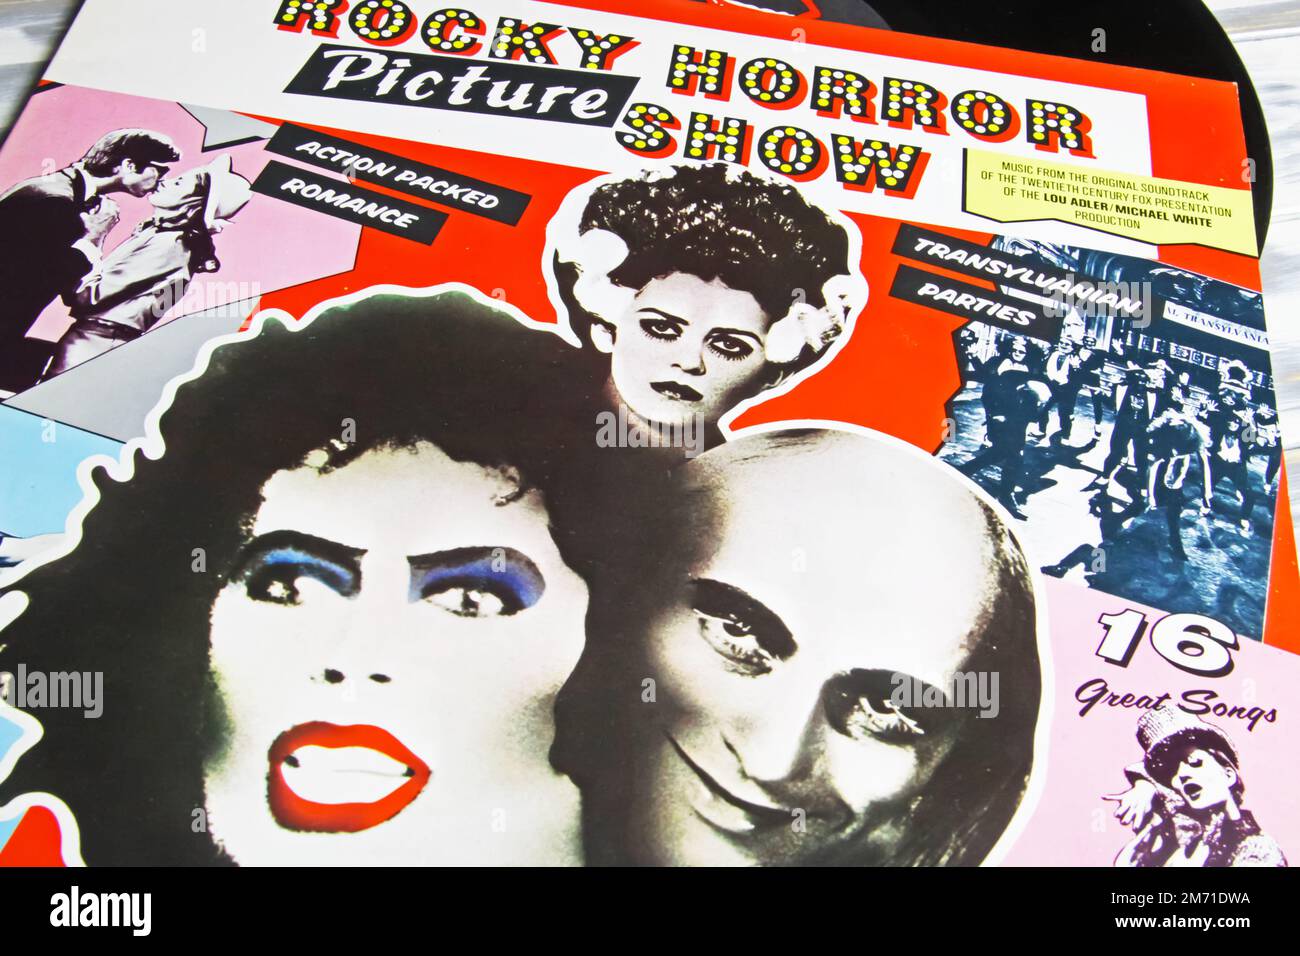 Viersen, Germany - May 9. 2022: Closeup of vinyl record cover of movie soundtrack rocky horror picture show Stock Photo